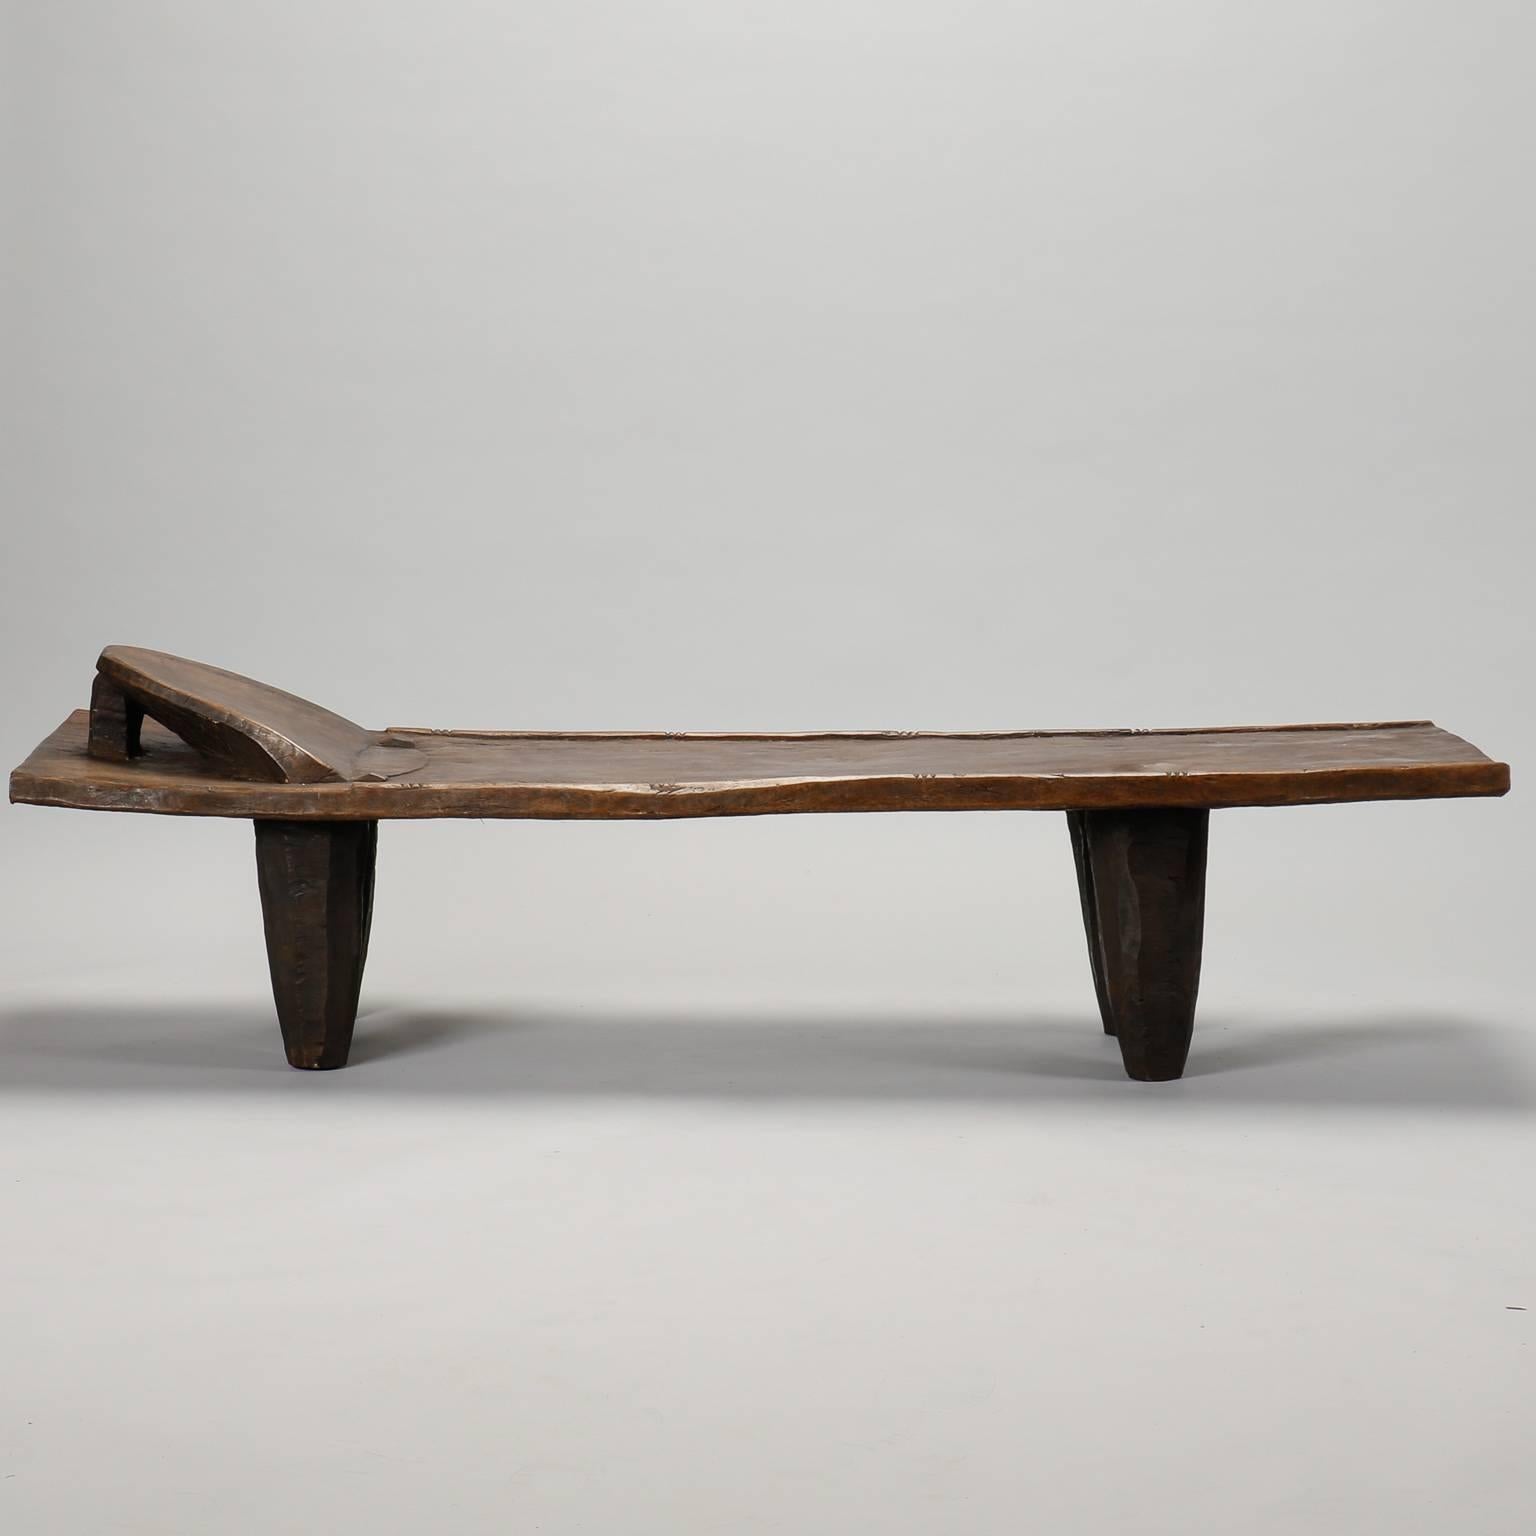 Wooden bench or daybed by the Senufo people of the Ivory Coast, circa 1970s. Dark stained wood bench has a built in head rest and thick, tapered legs.